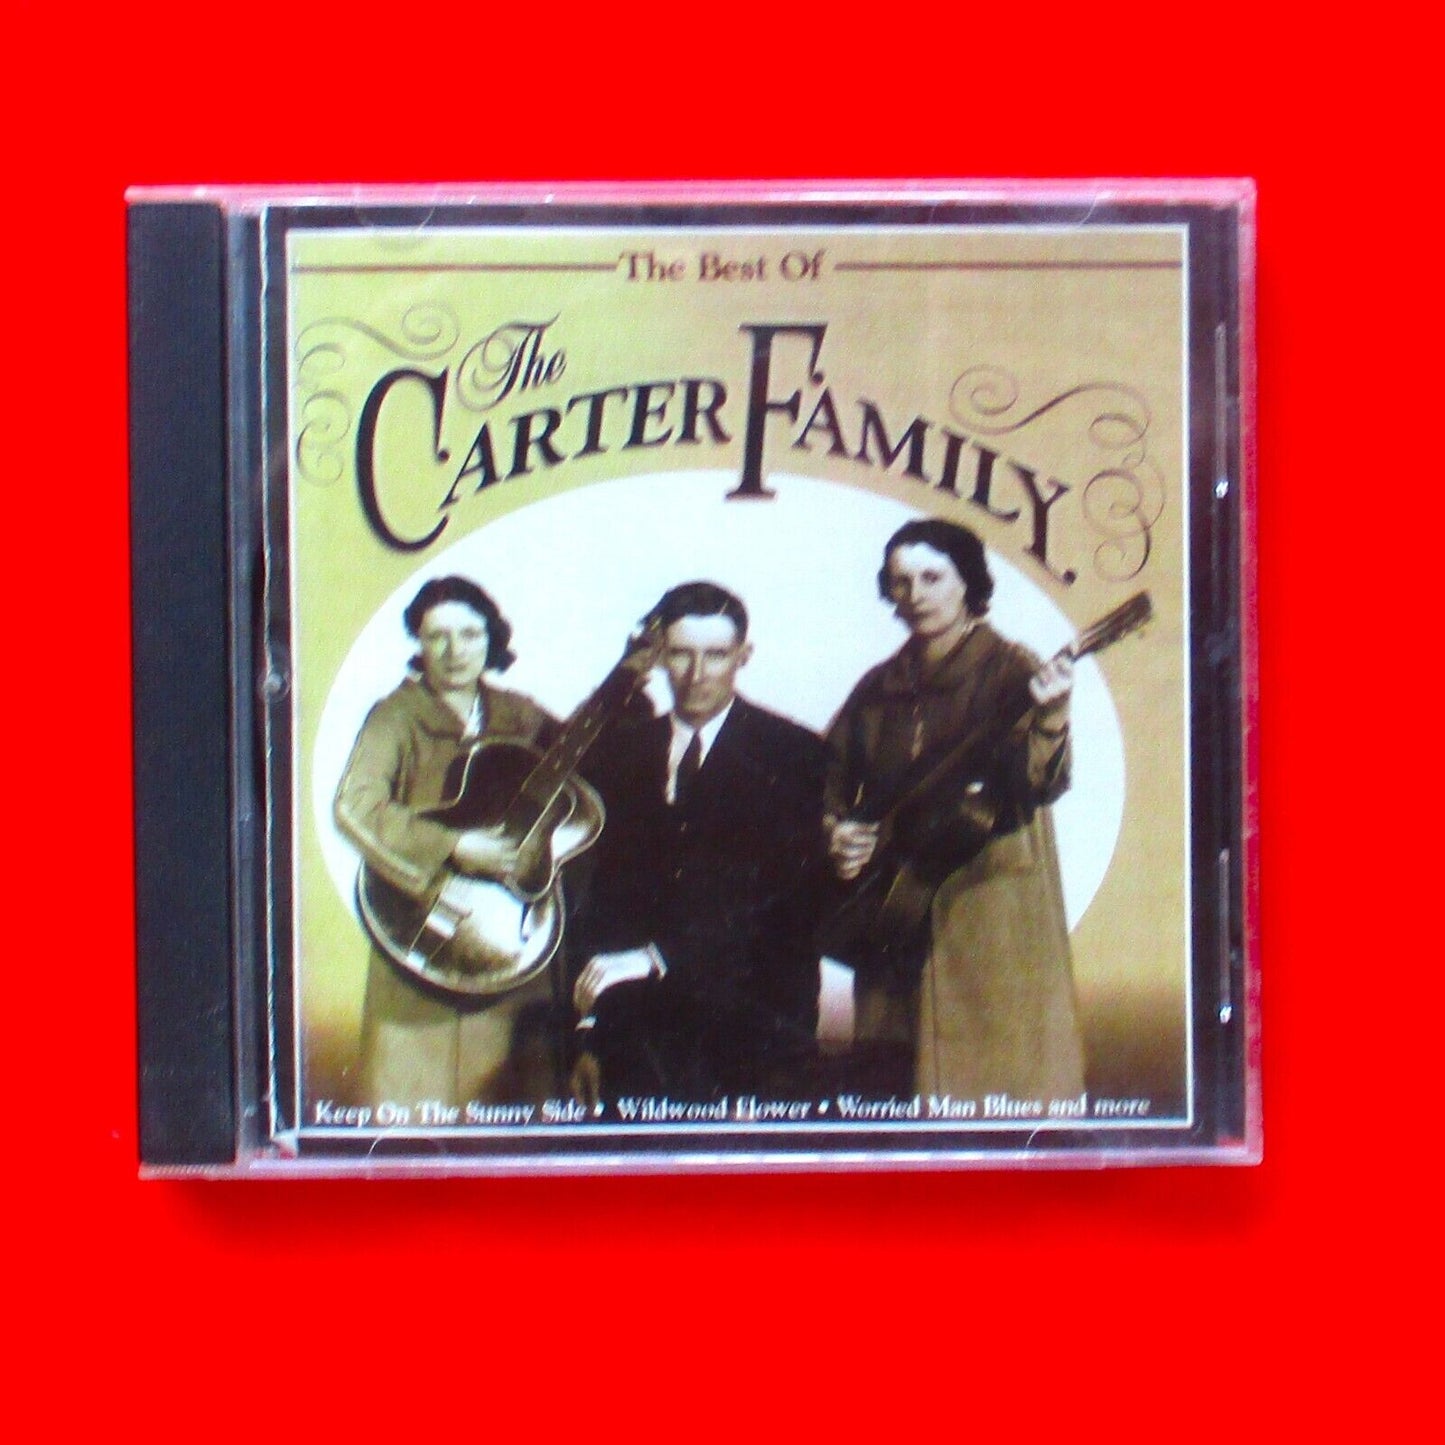 The Carter Family ‎The Best Of The Carter Family 2002 CD Compilation